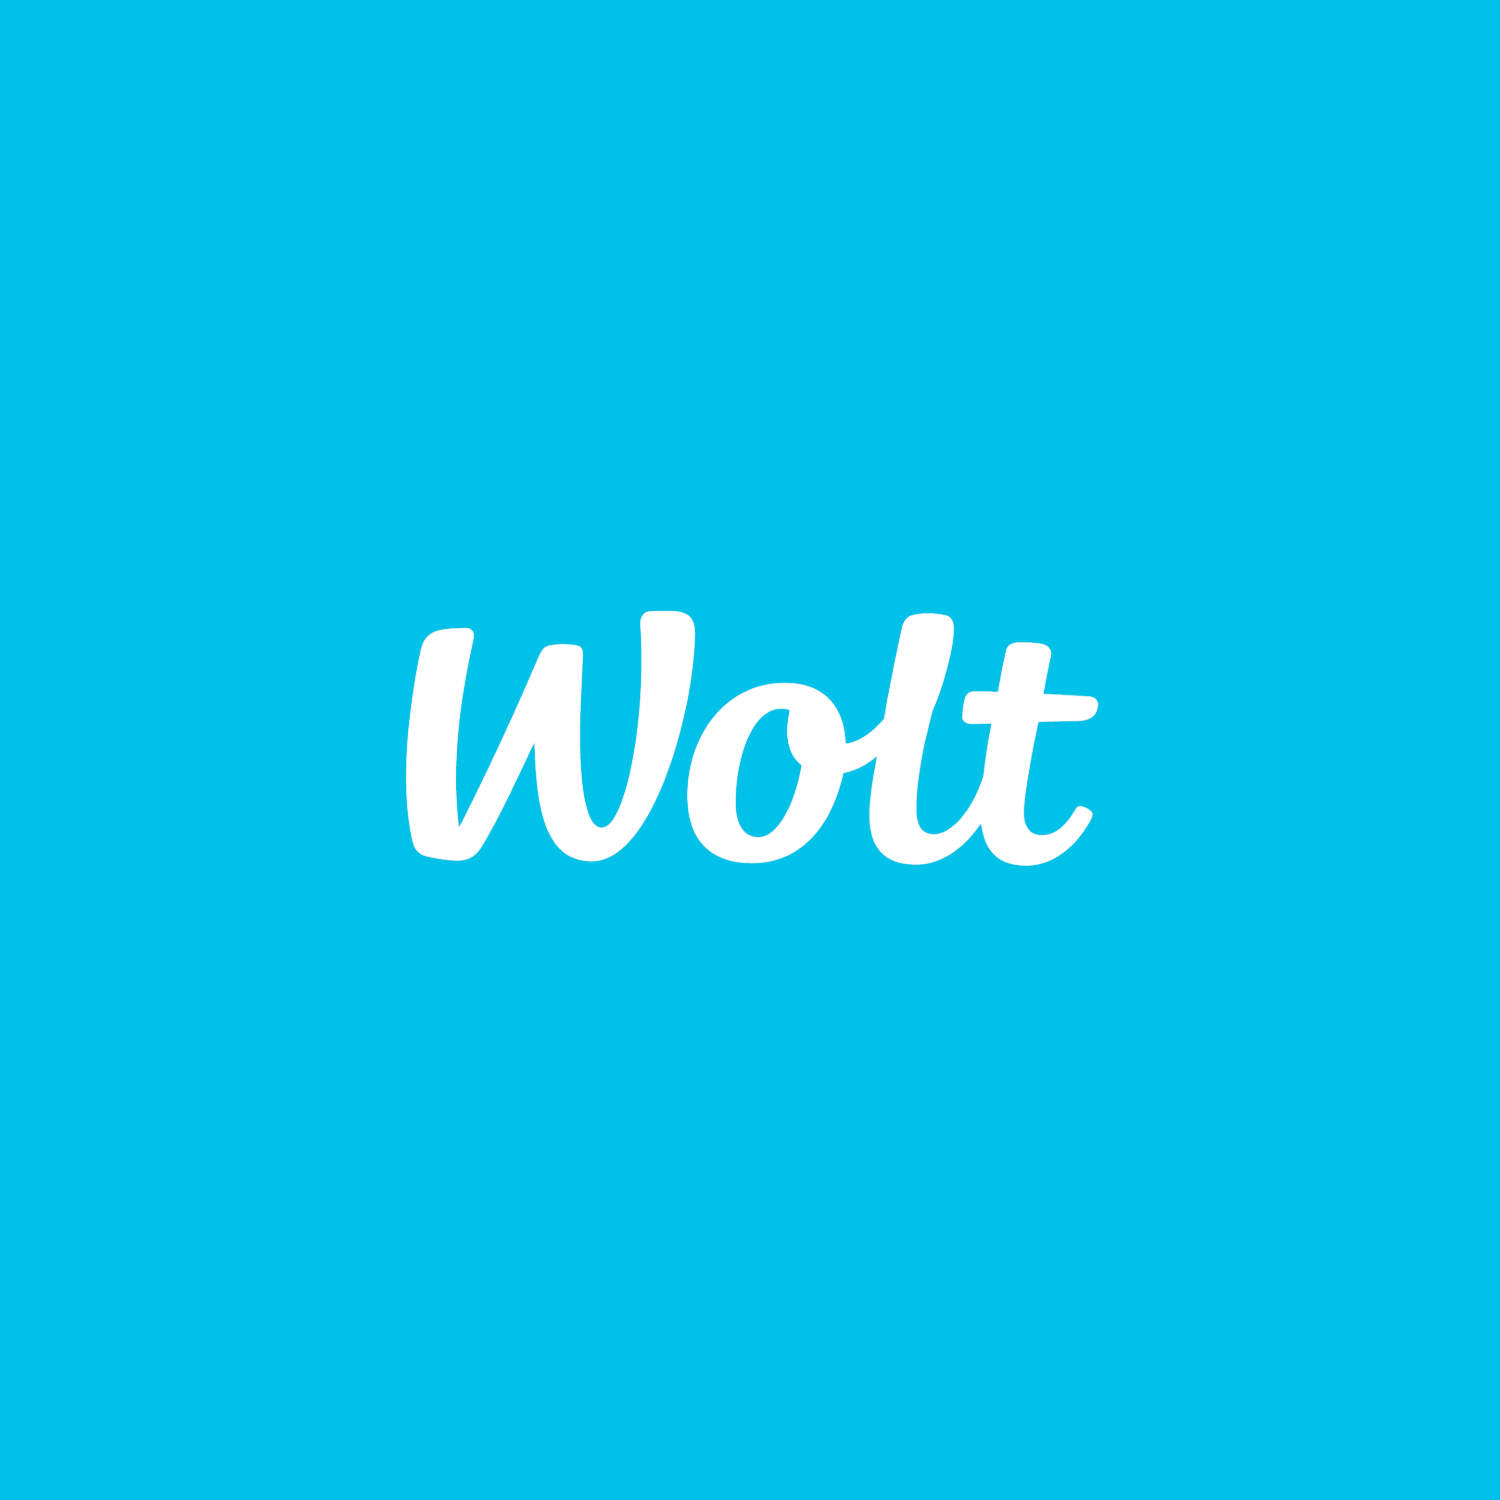 Logo of Wolt